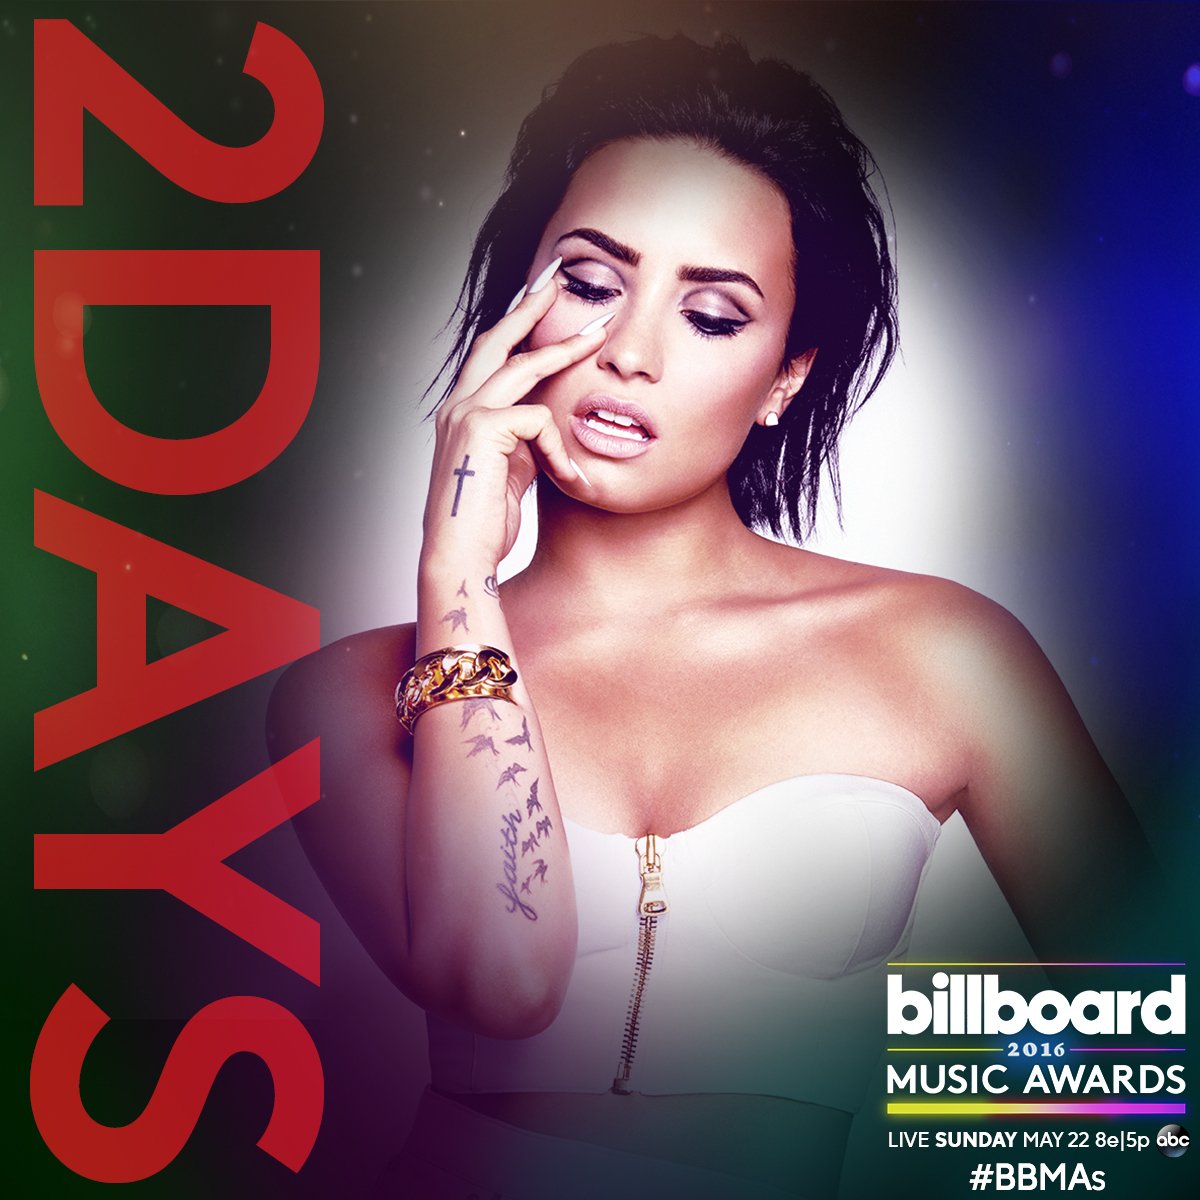 RT @BBMAs: In just TWO DAYS you can watch @ddlovato take the #BBMAs stage! May 22 at 8e/5p on ABC. ⚡️ https://t.co/mW6WehaNeV